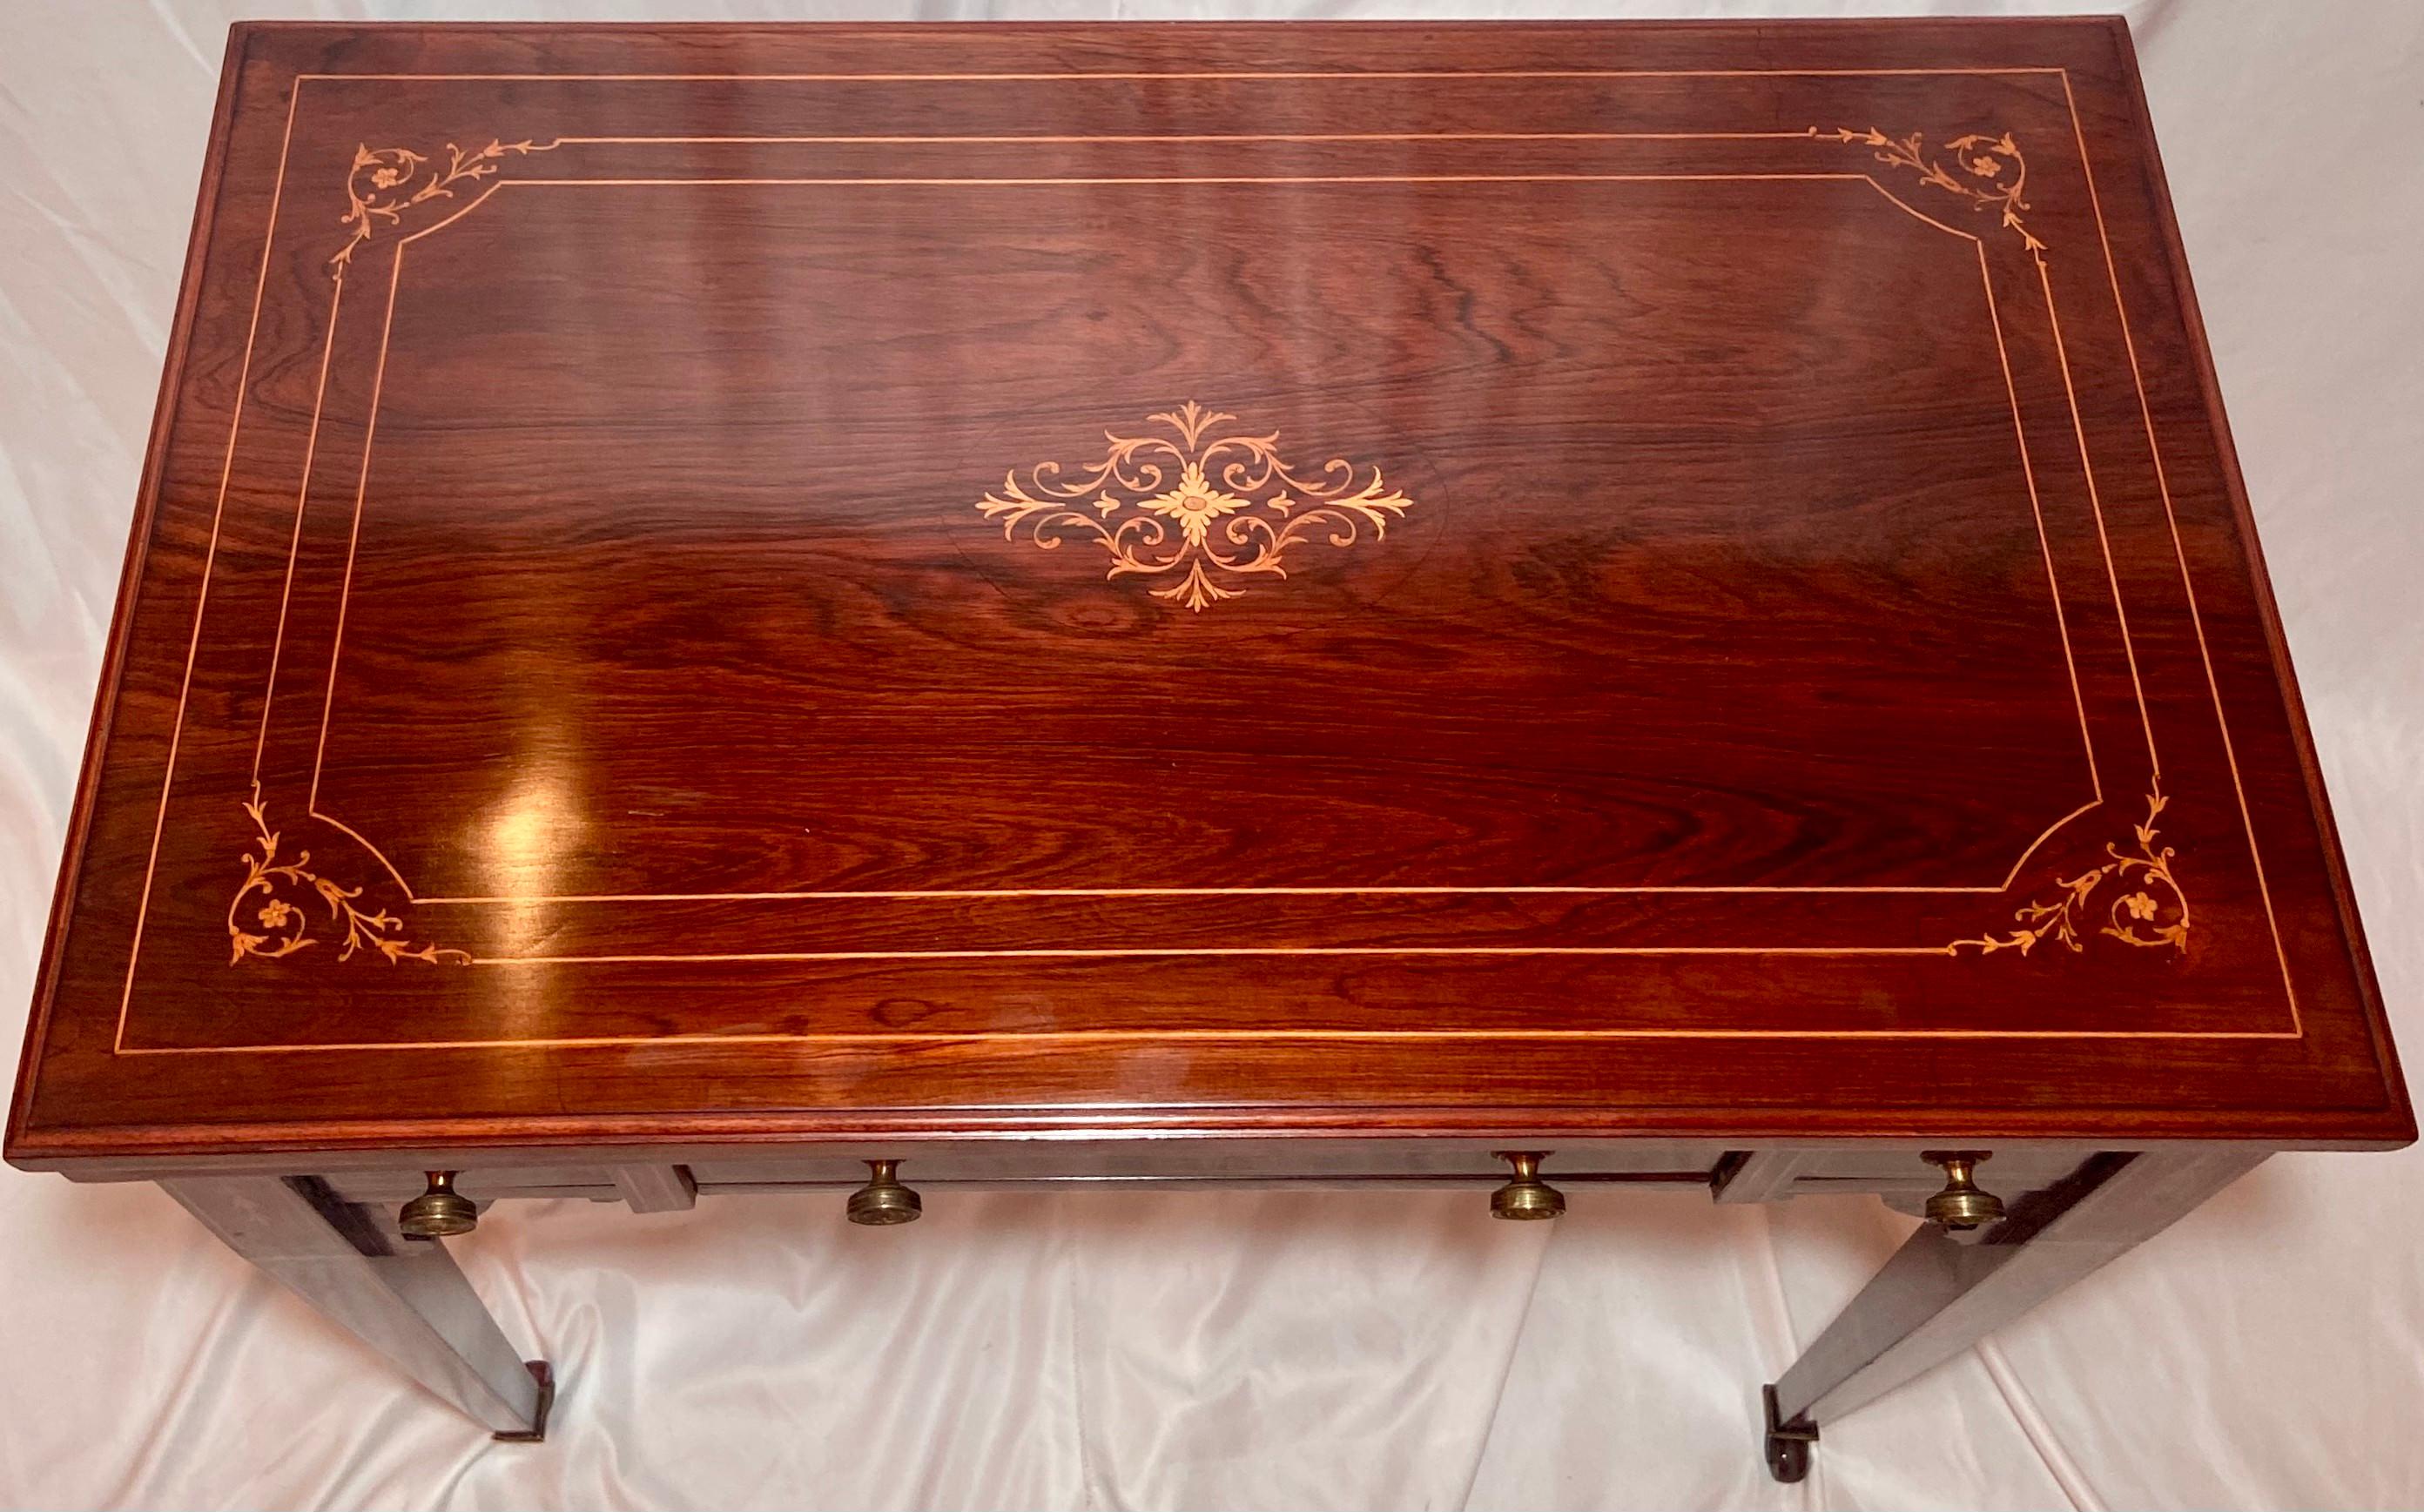 Antique English Victorian Rosewood with Inlay Games Table, Circa 1870-1880 In Good Condition For Sale In New Orleans, LA